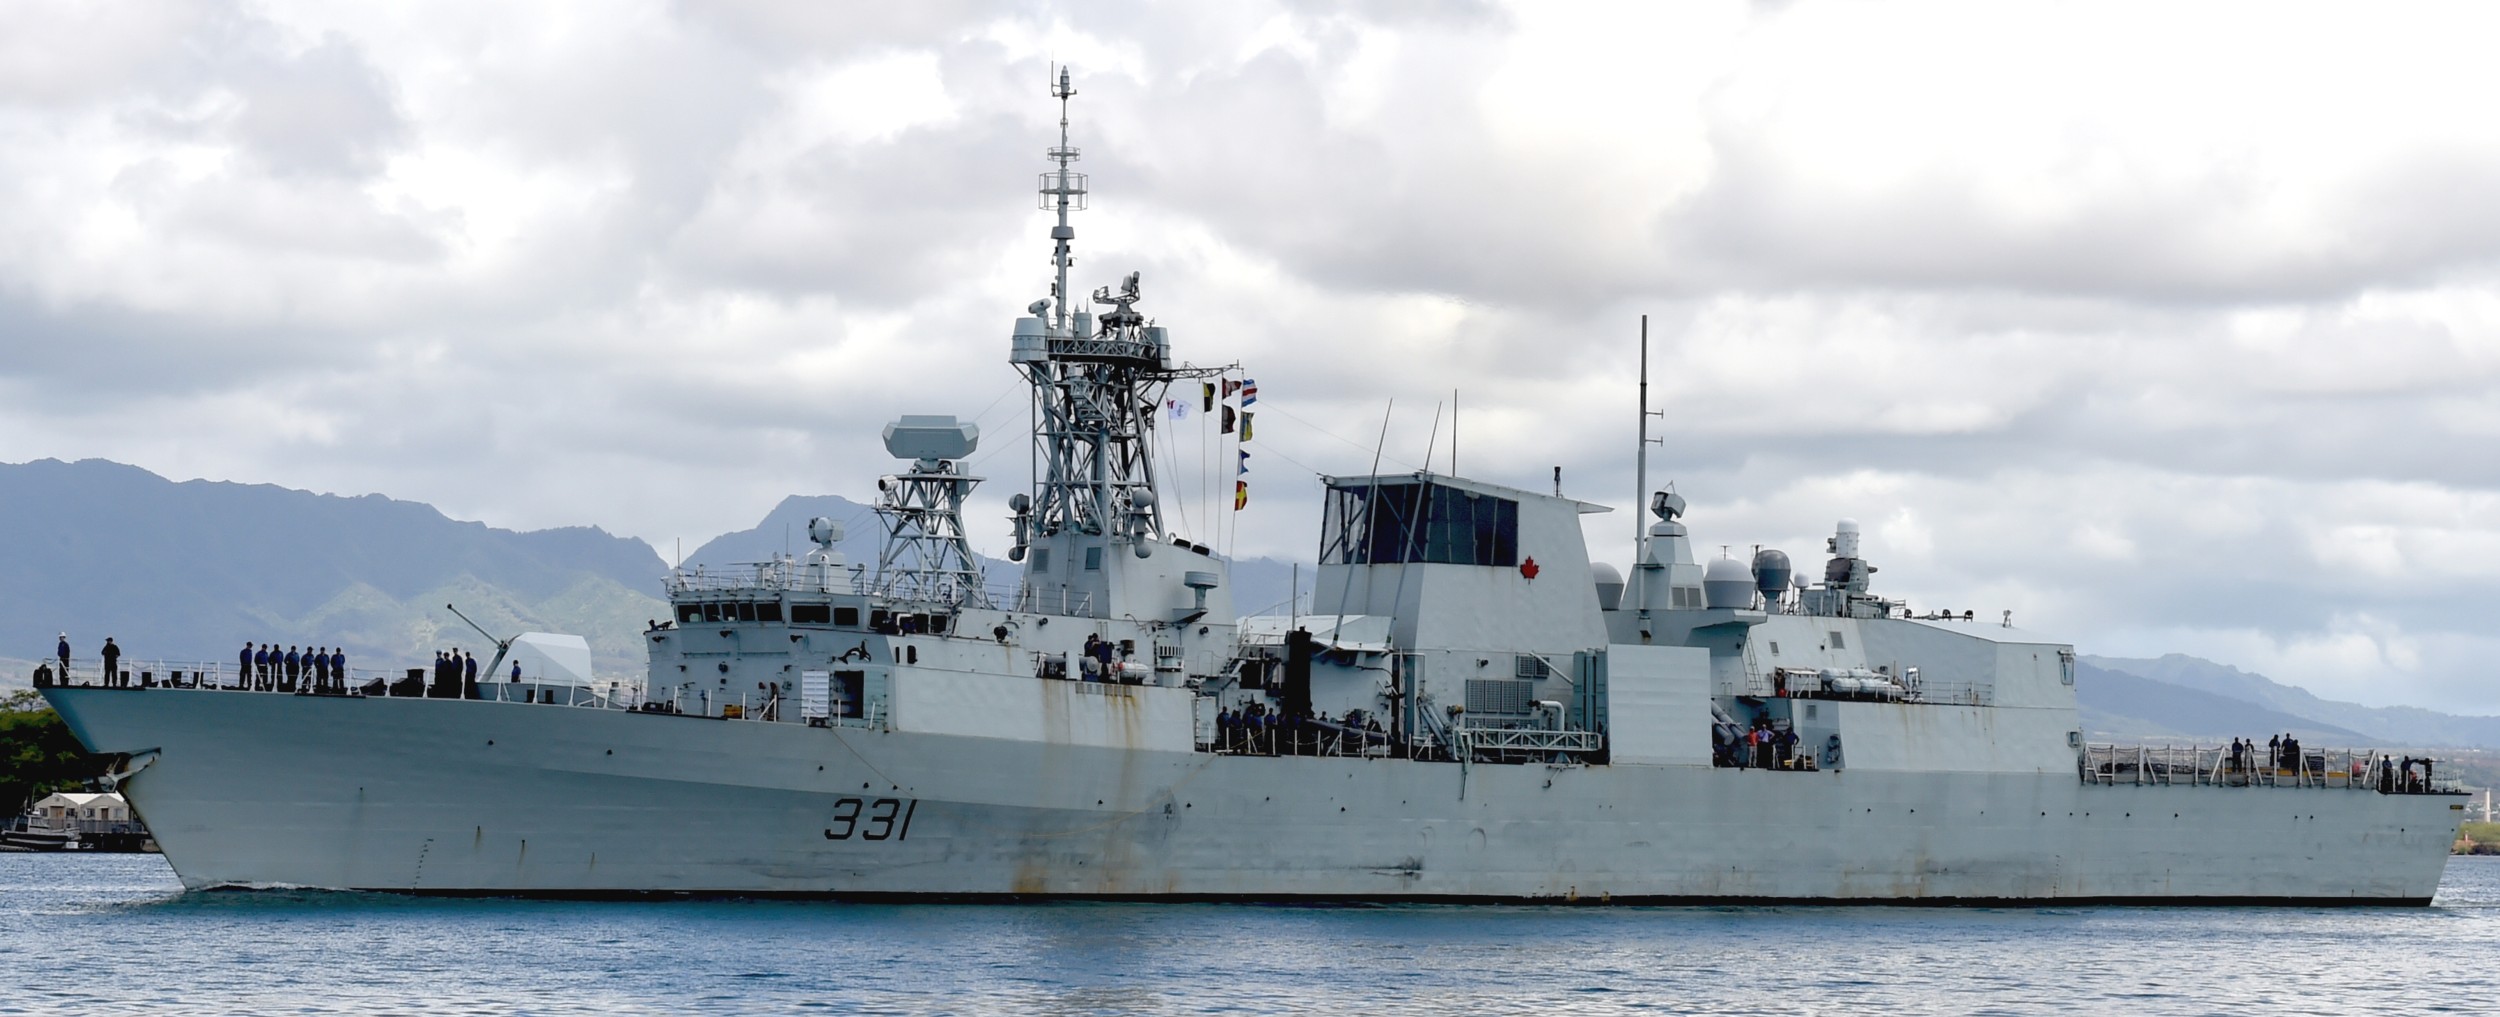 ffh-331 hmcs vancouver halifax class helicopter patrol frigate ncsm royal canadian navy 14